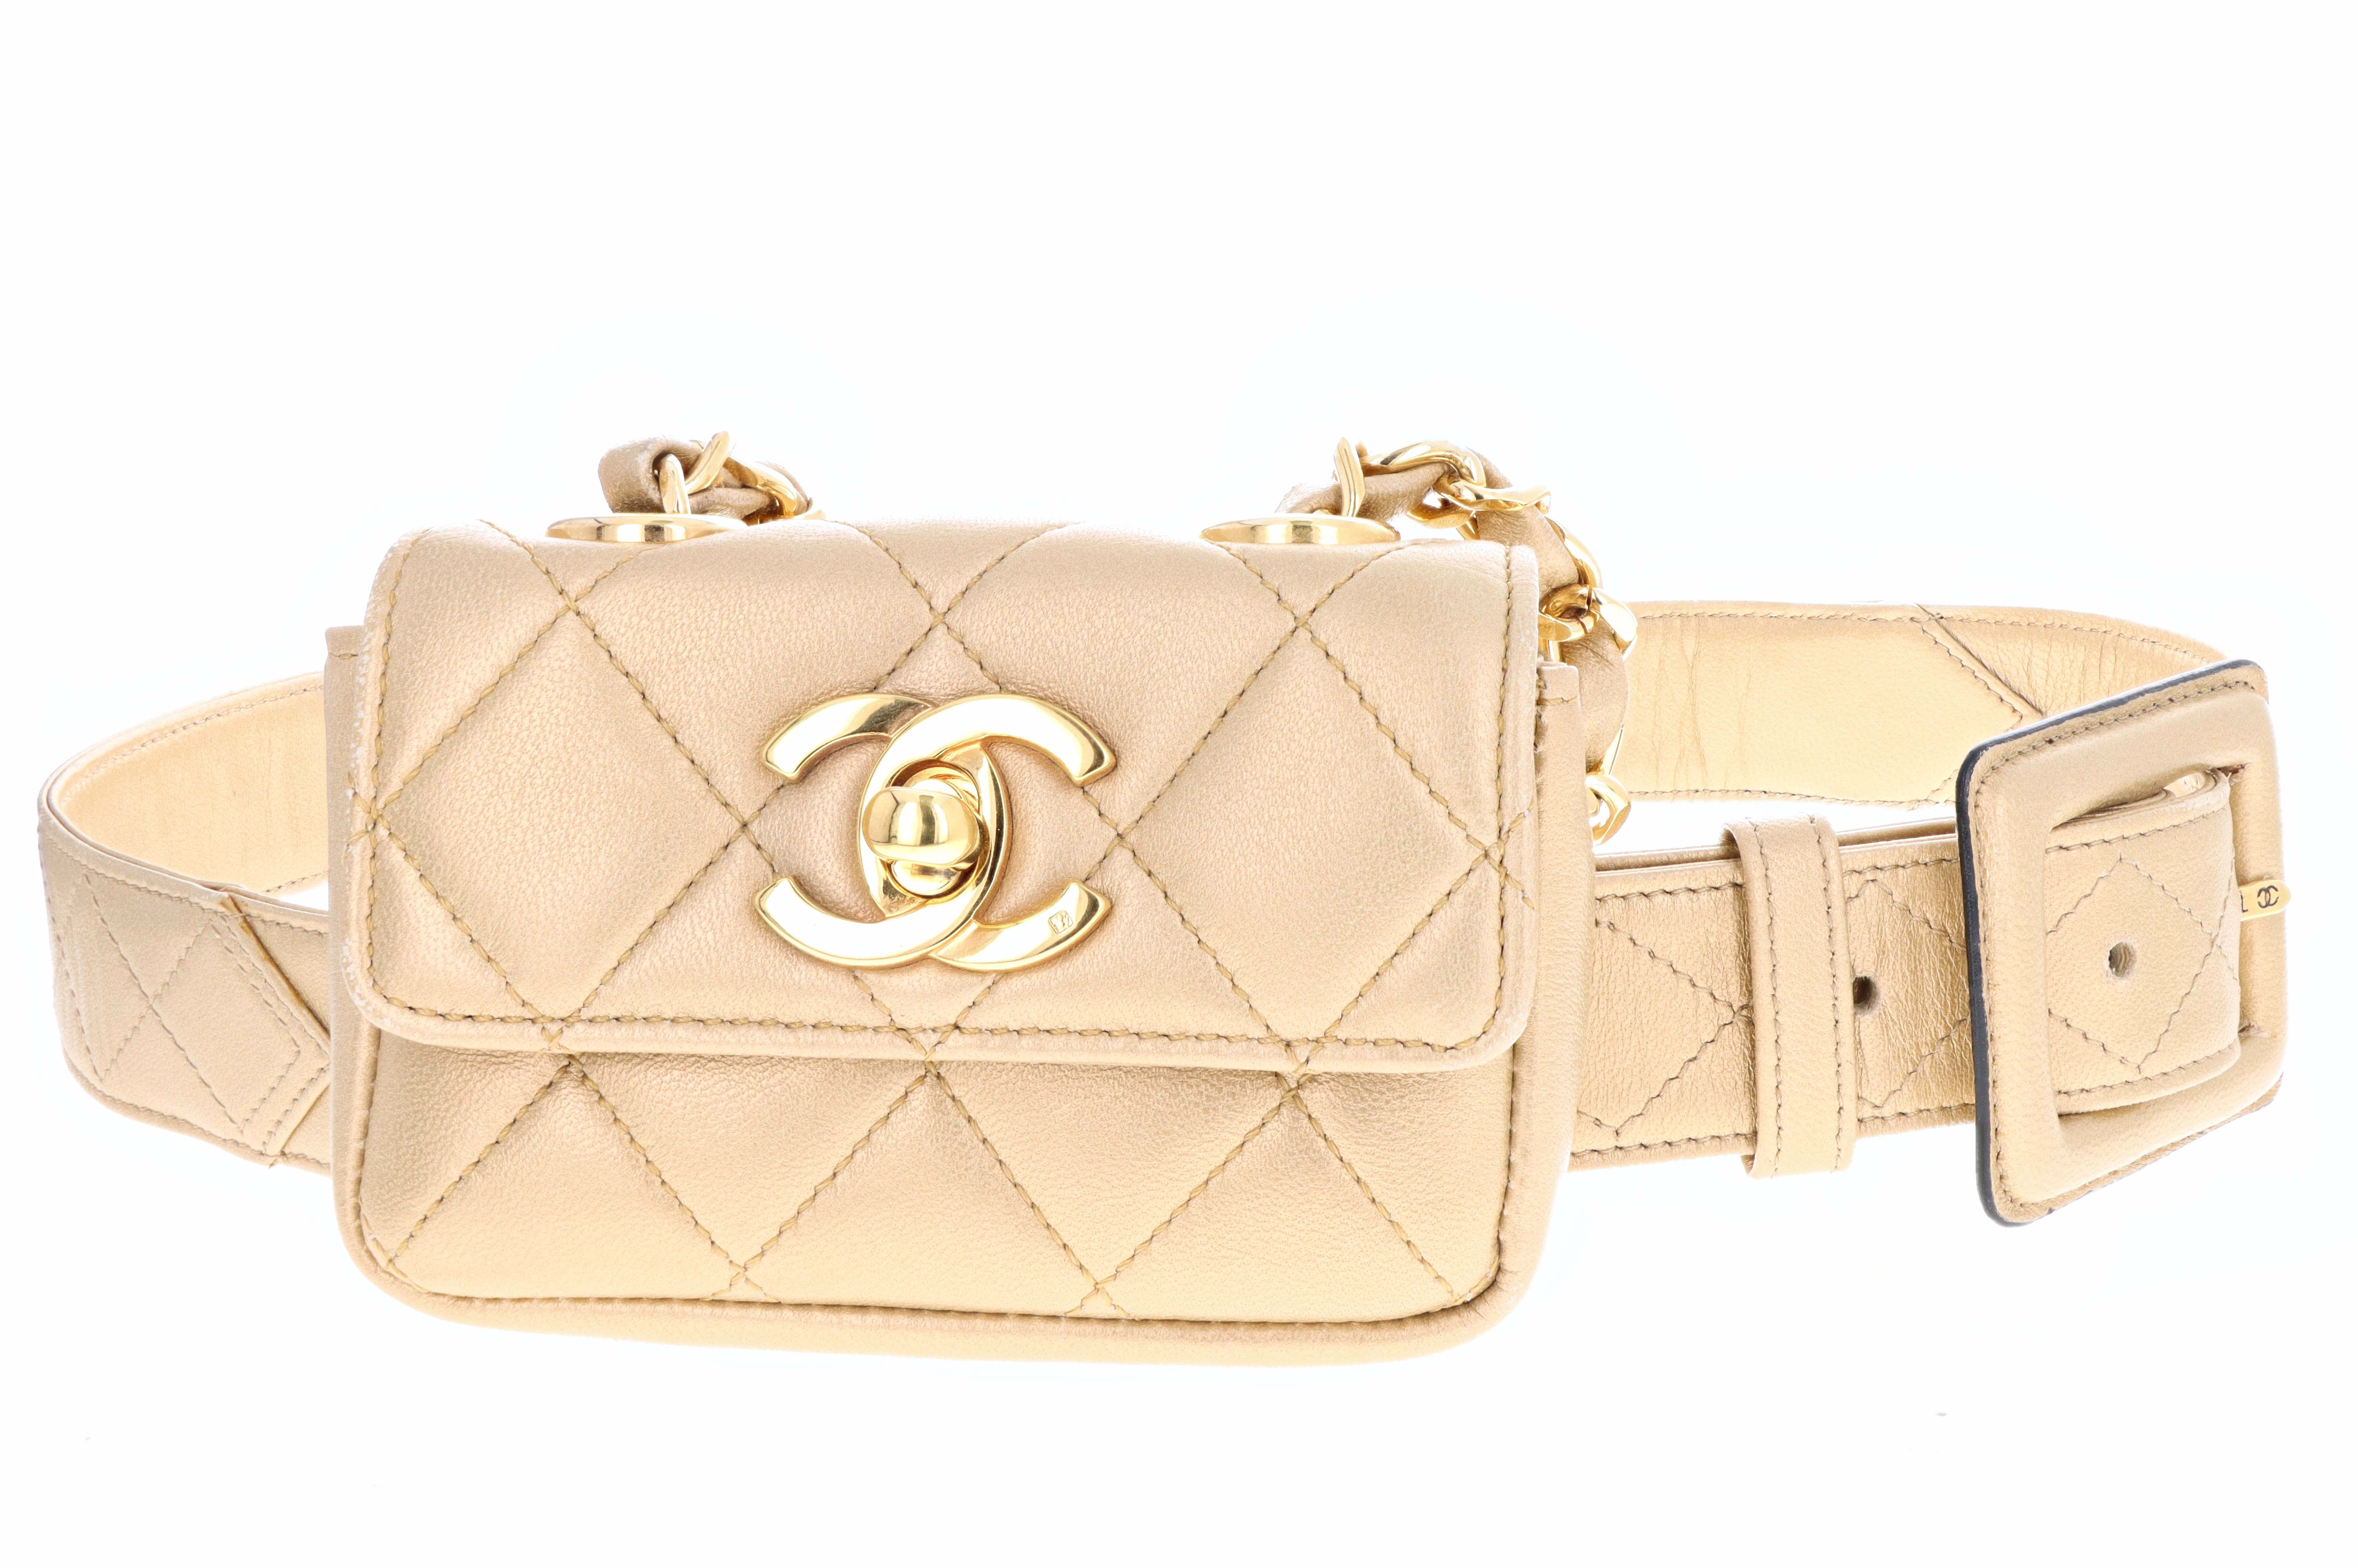 Rare Vintage Chanel Quilted Hanging Micro Belt Bag- Gold